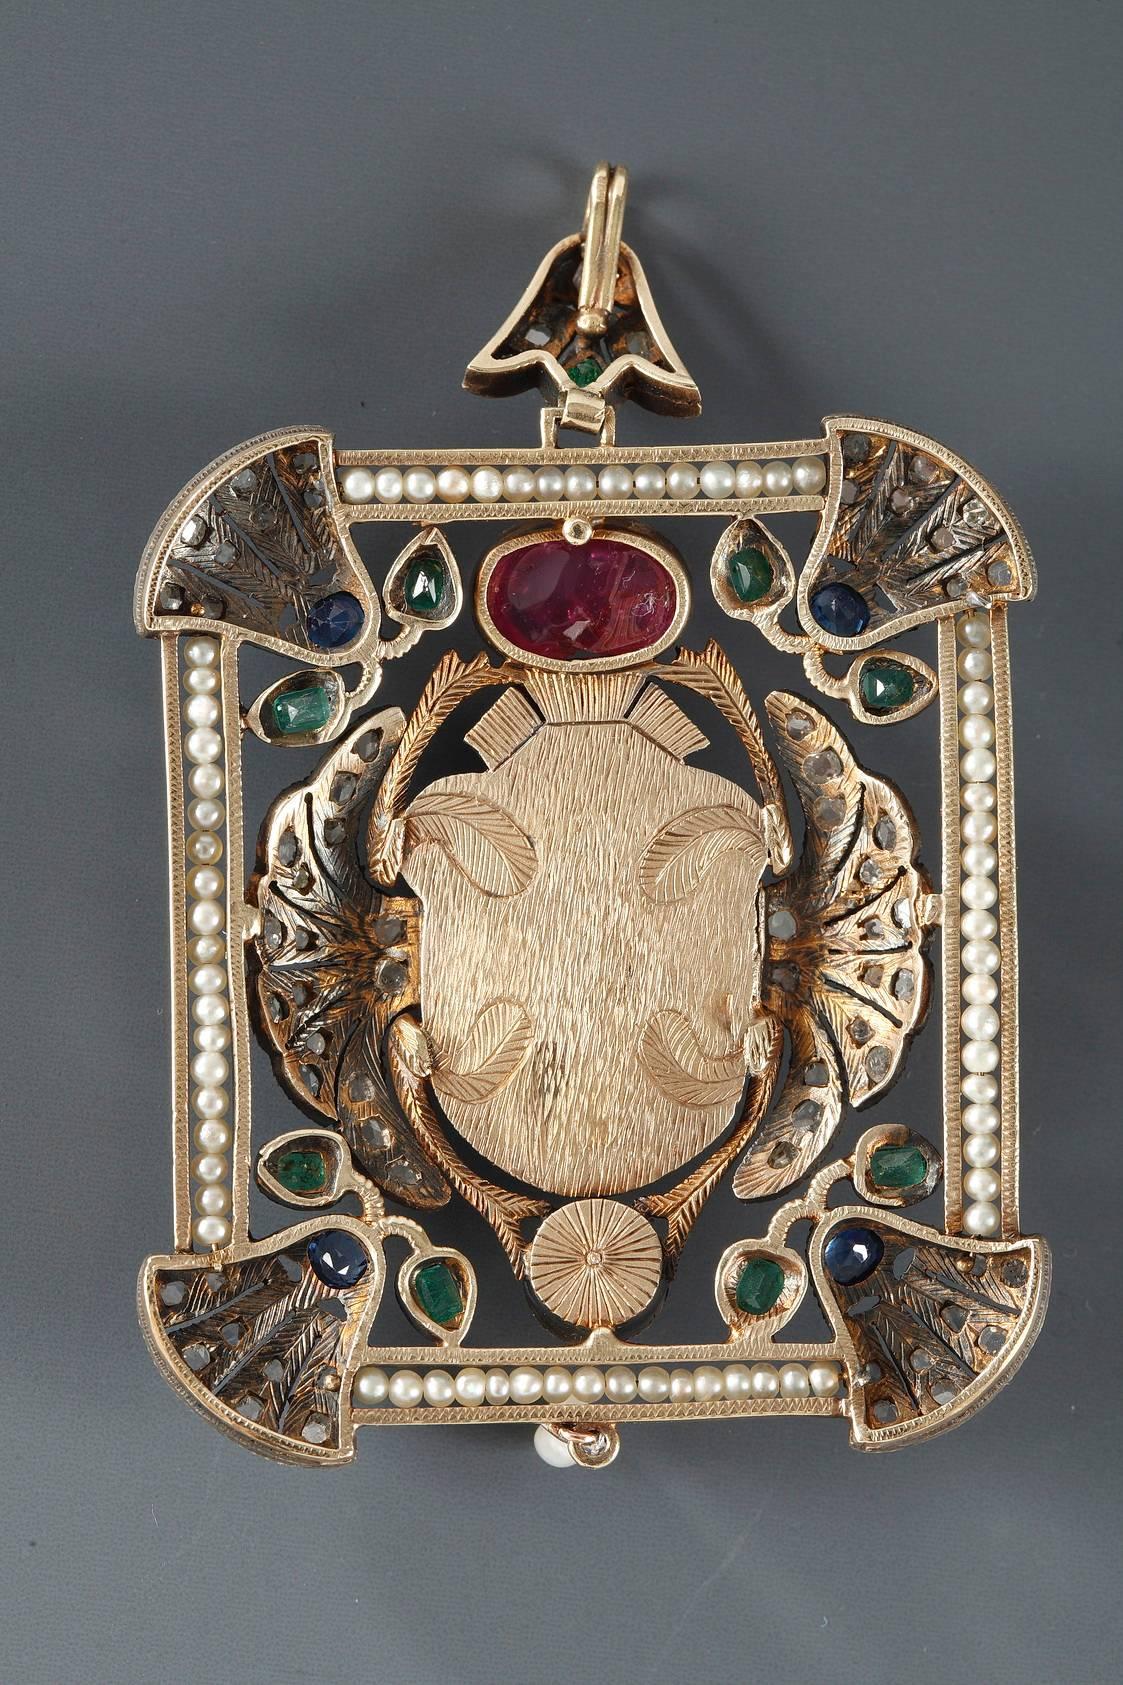 Silver and 14k gold-mounted pendant featuring a winged scarab beetle. The body of the beetle is decorated with square-cut emeralds, and a large, ruby cabochon is set above its head. It is surrounded with a floral decoration that is highlighted with